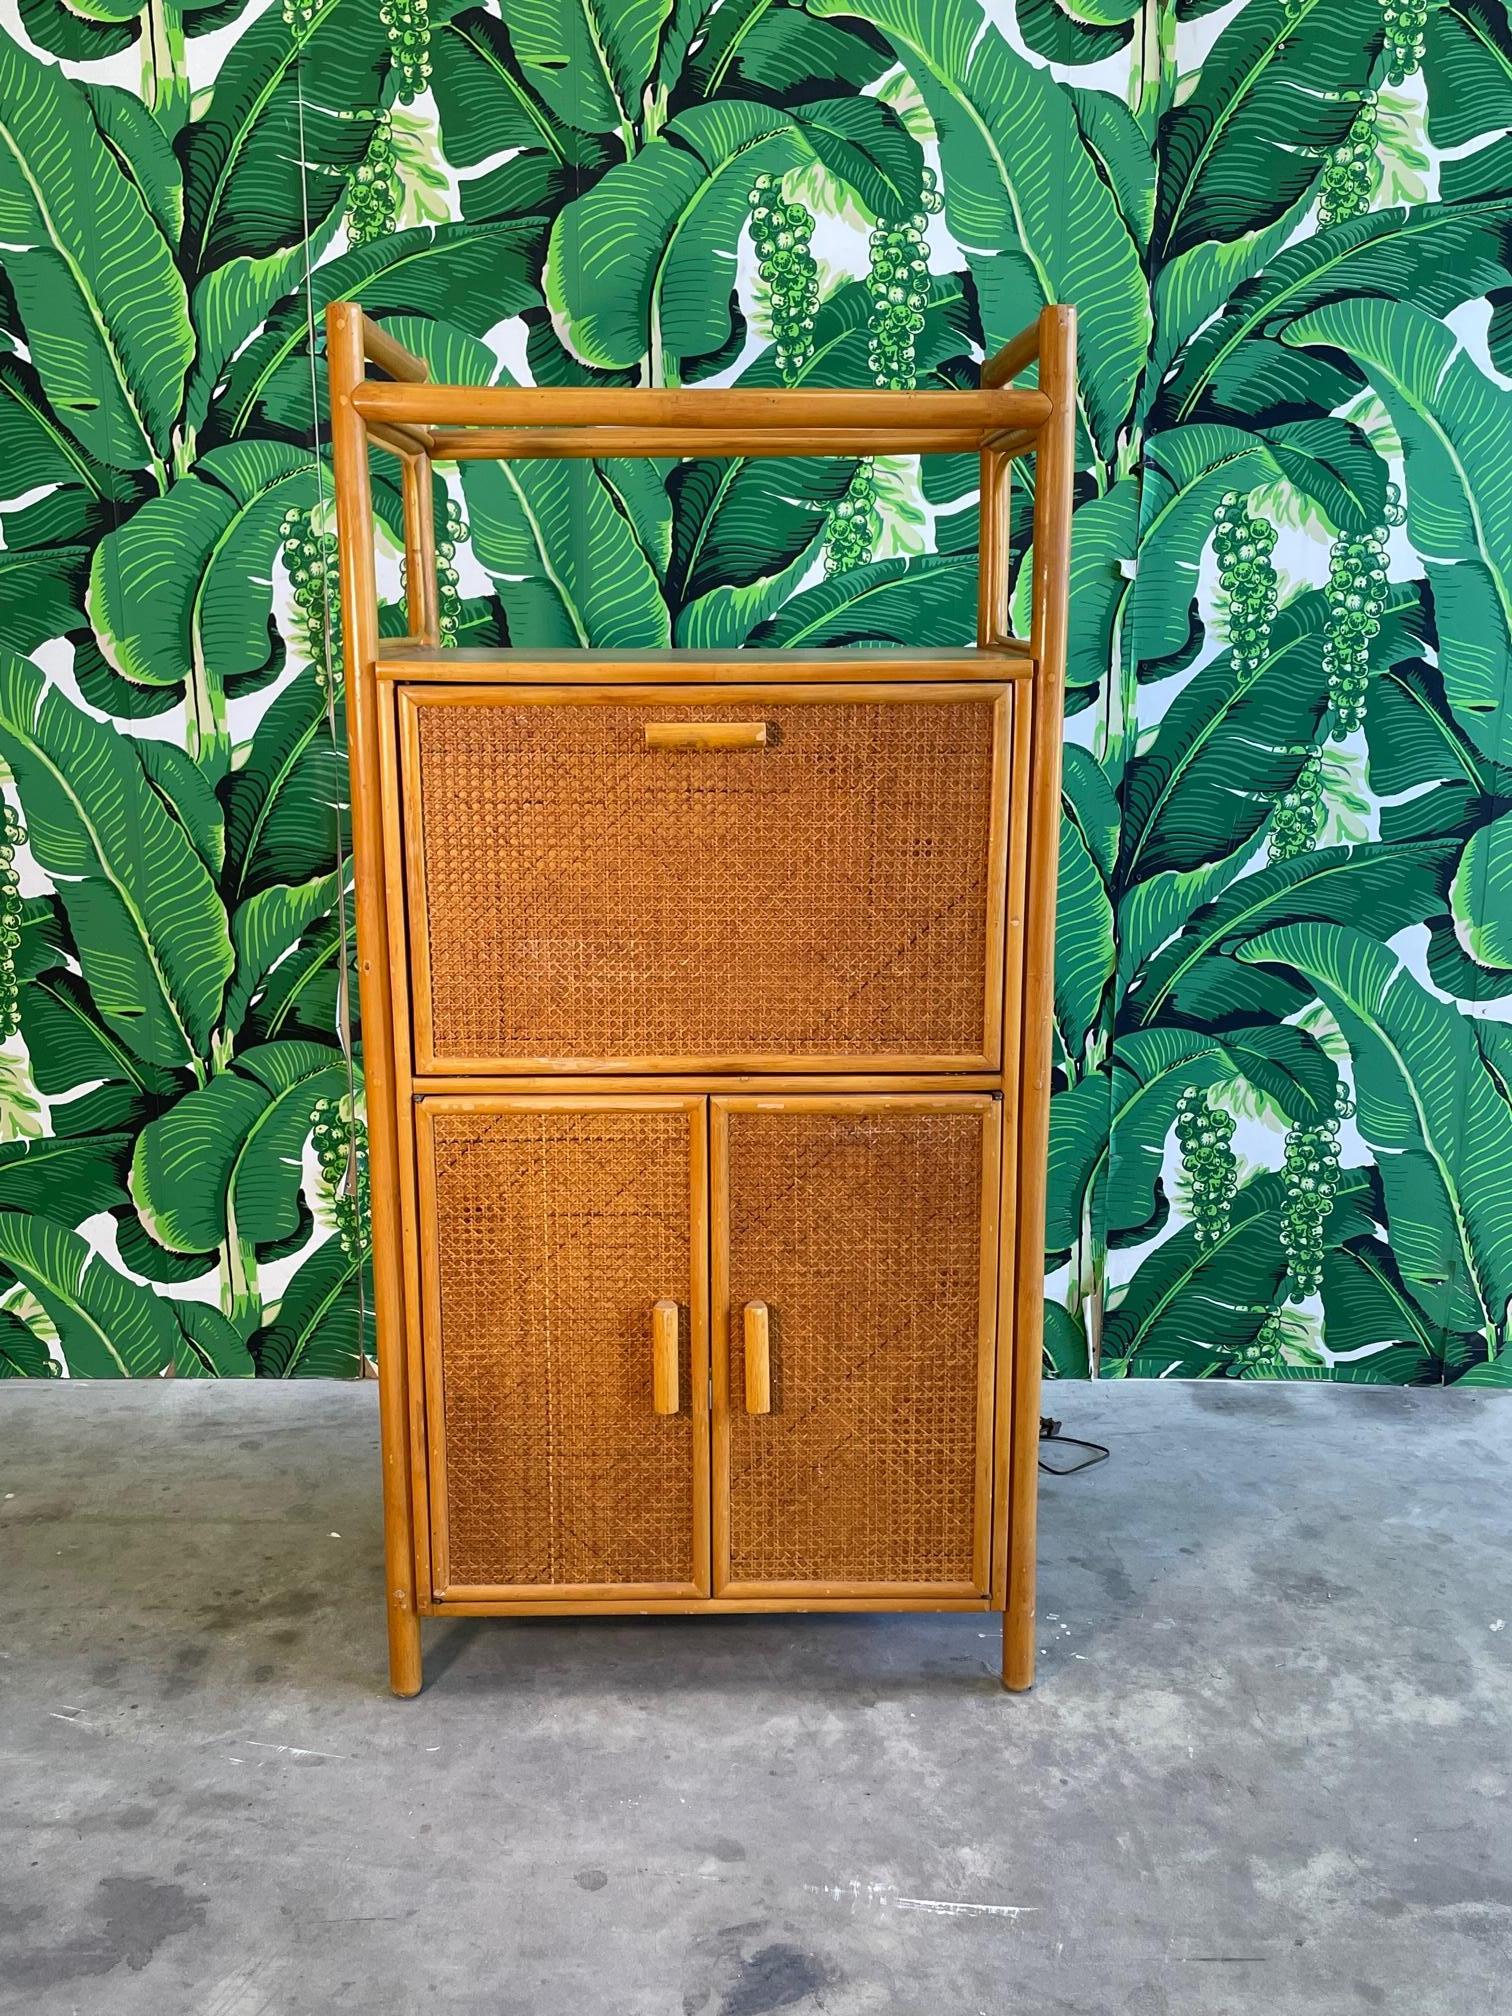 Vintage bar cabinet features wood and rattan construction, drop leaf lighted bar area, and cane veneers. Storage below behind double doors as well as on top shelf. Good vintage condition with imperfections consistent with age. May exhibit scuffs,